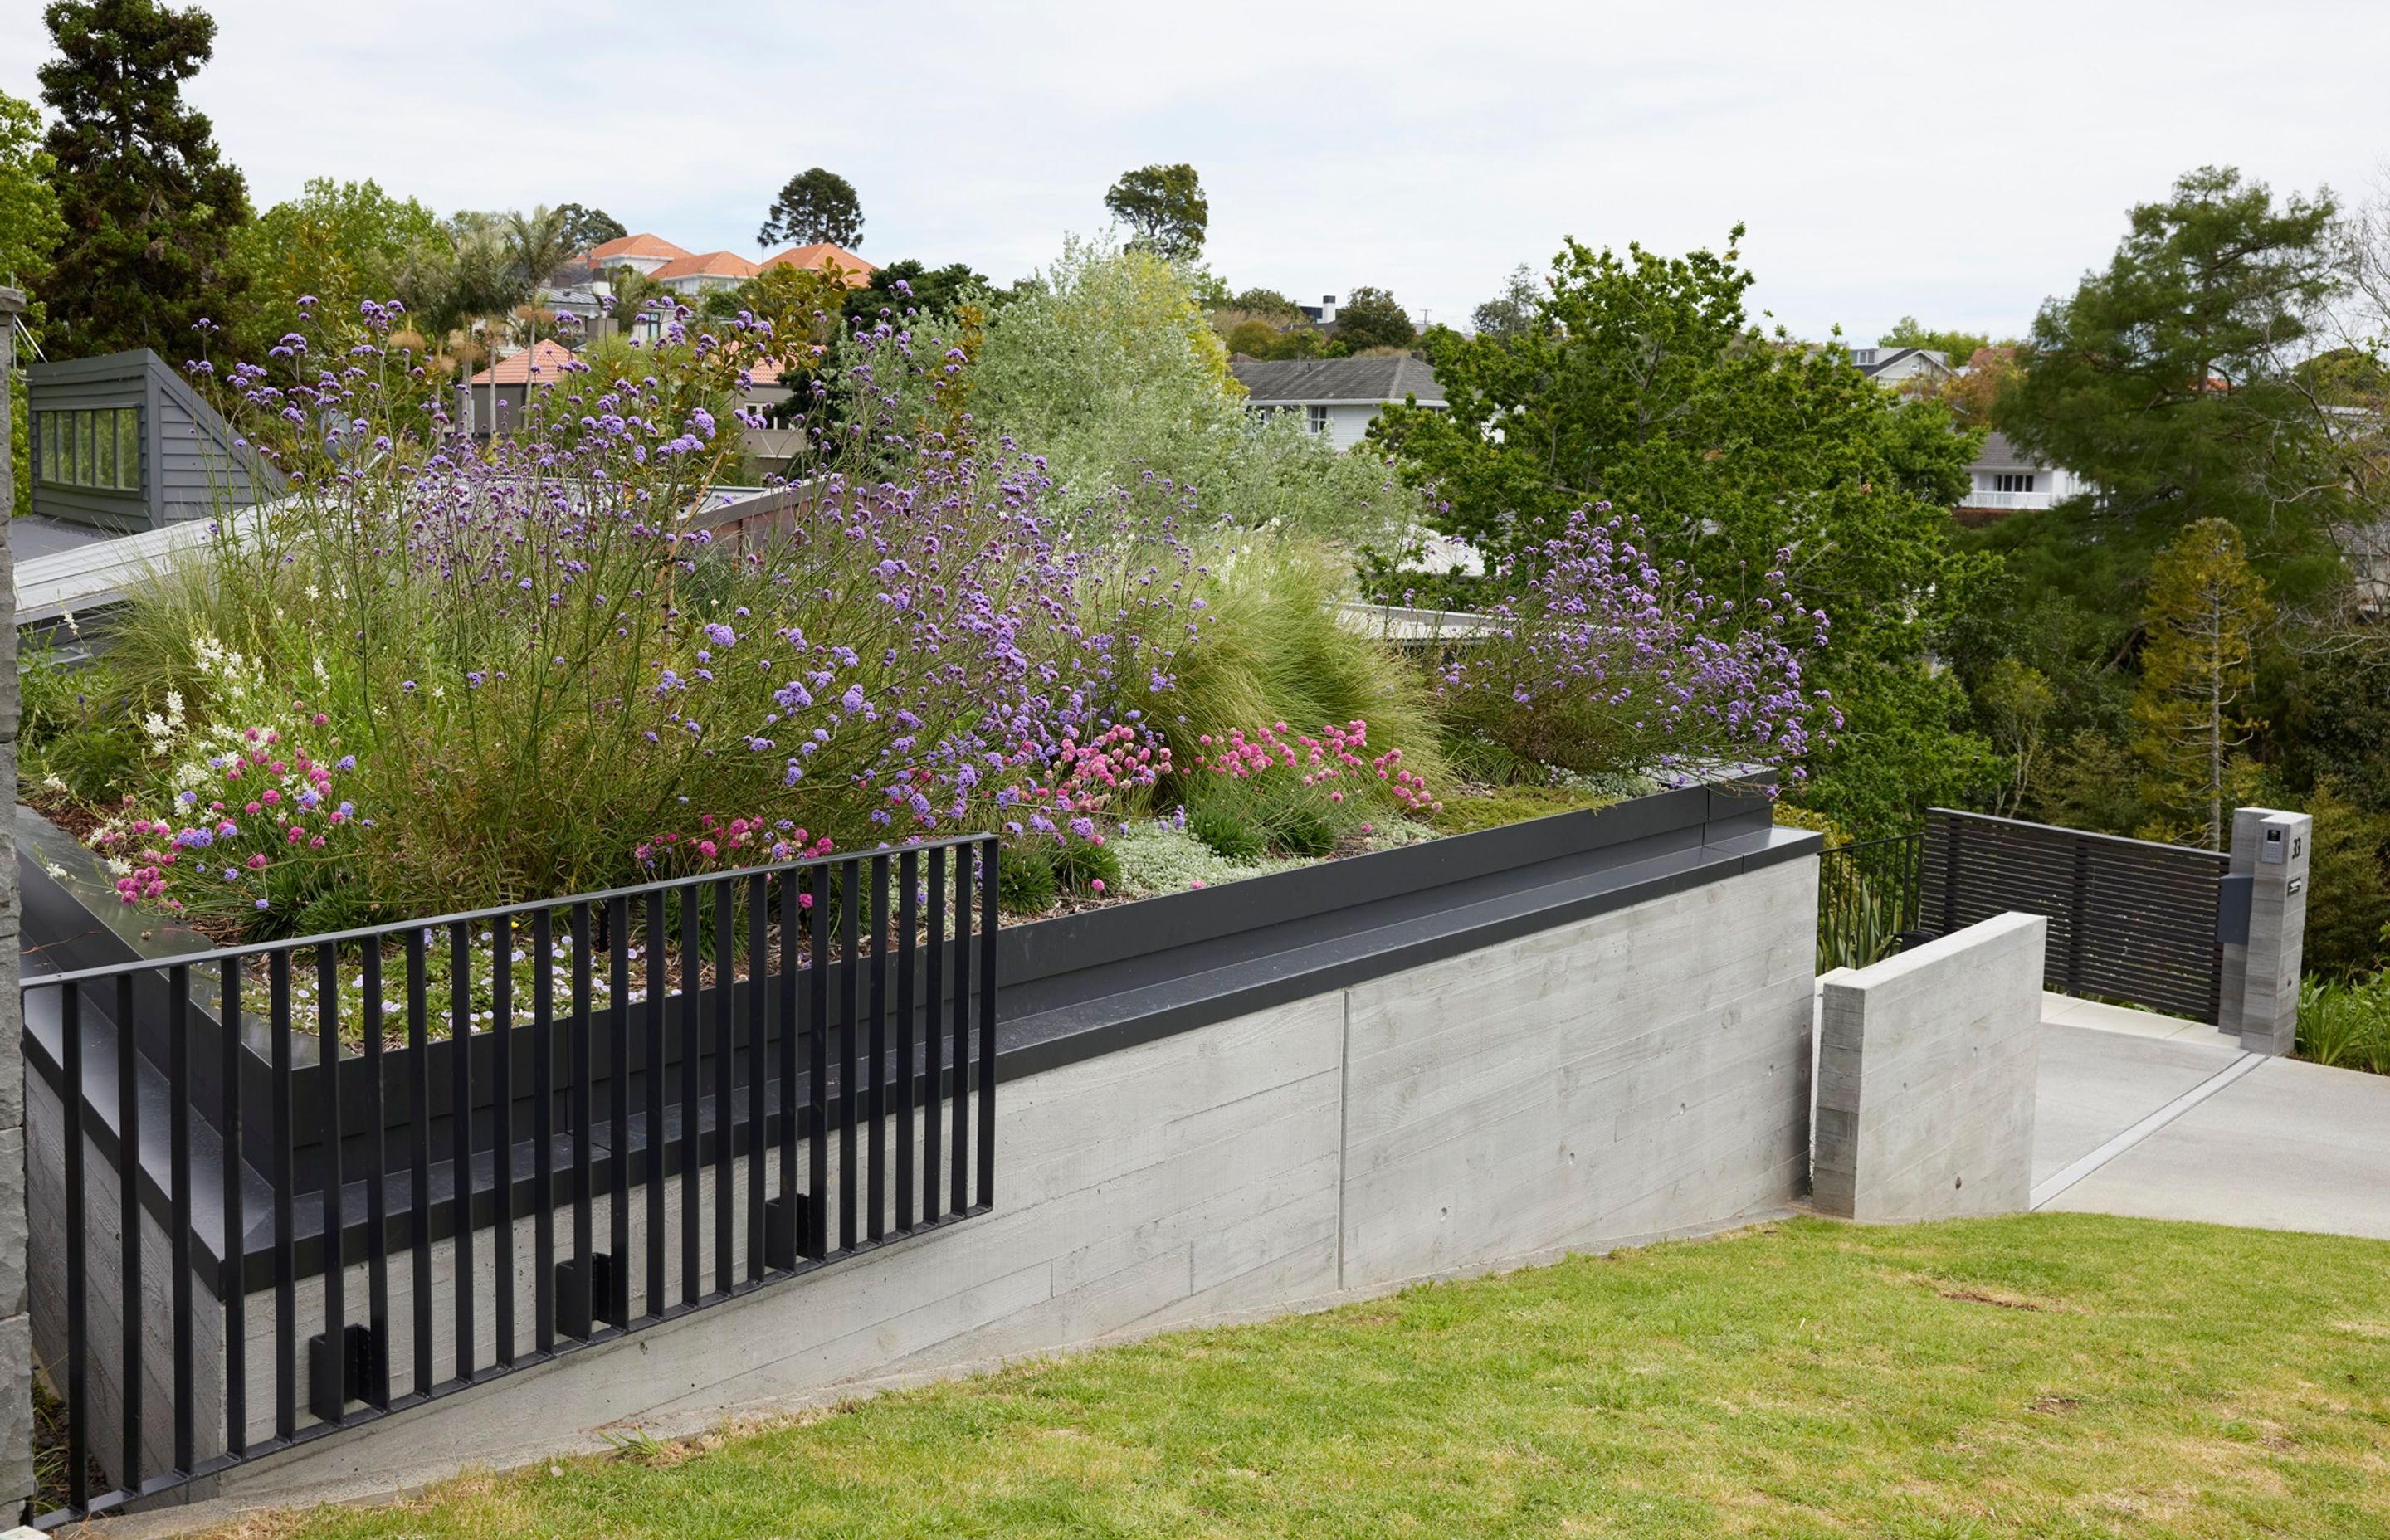 On approach to this Remuera residence, the green roof blends in with the surrounding landscaping.